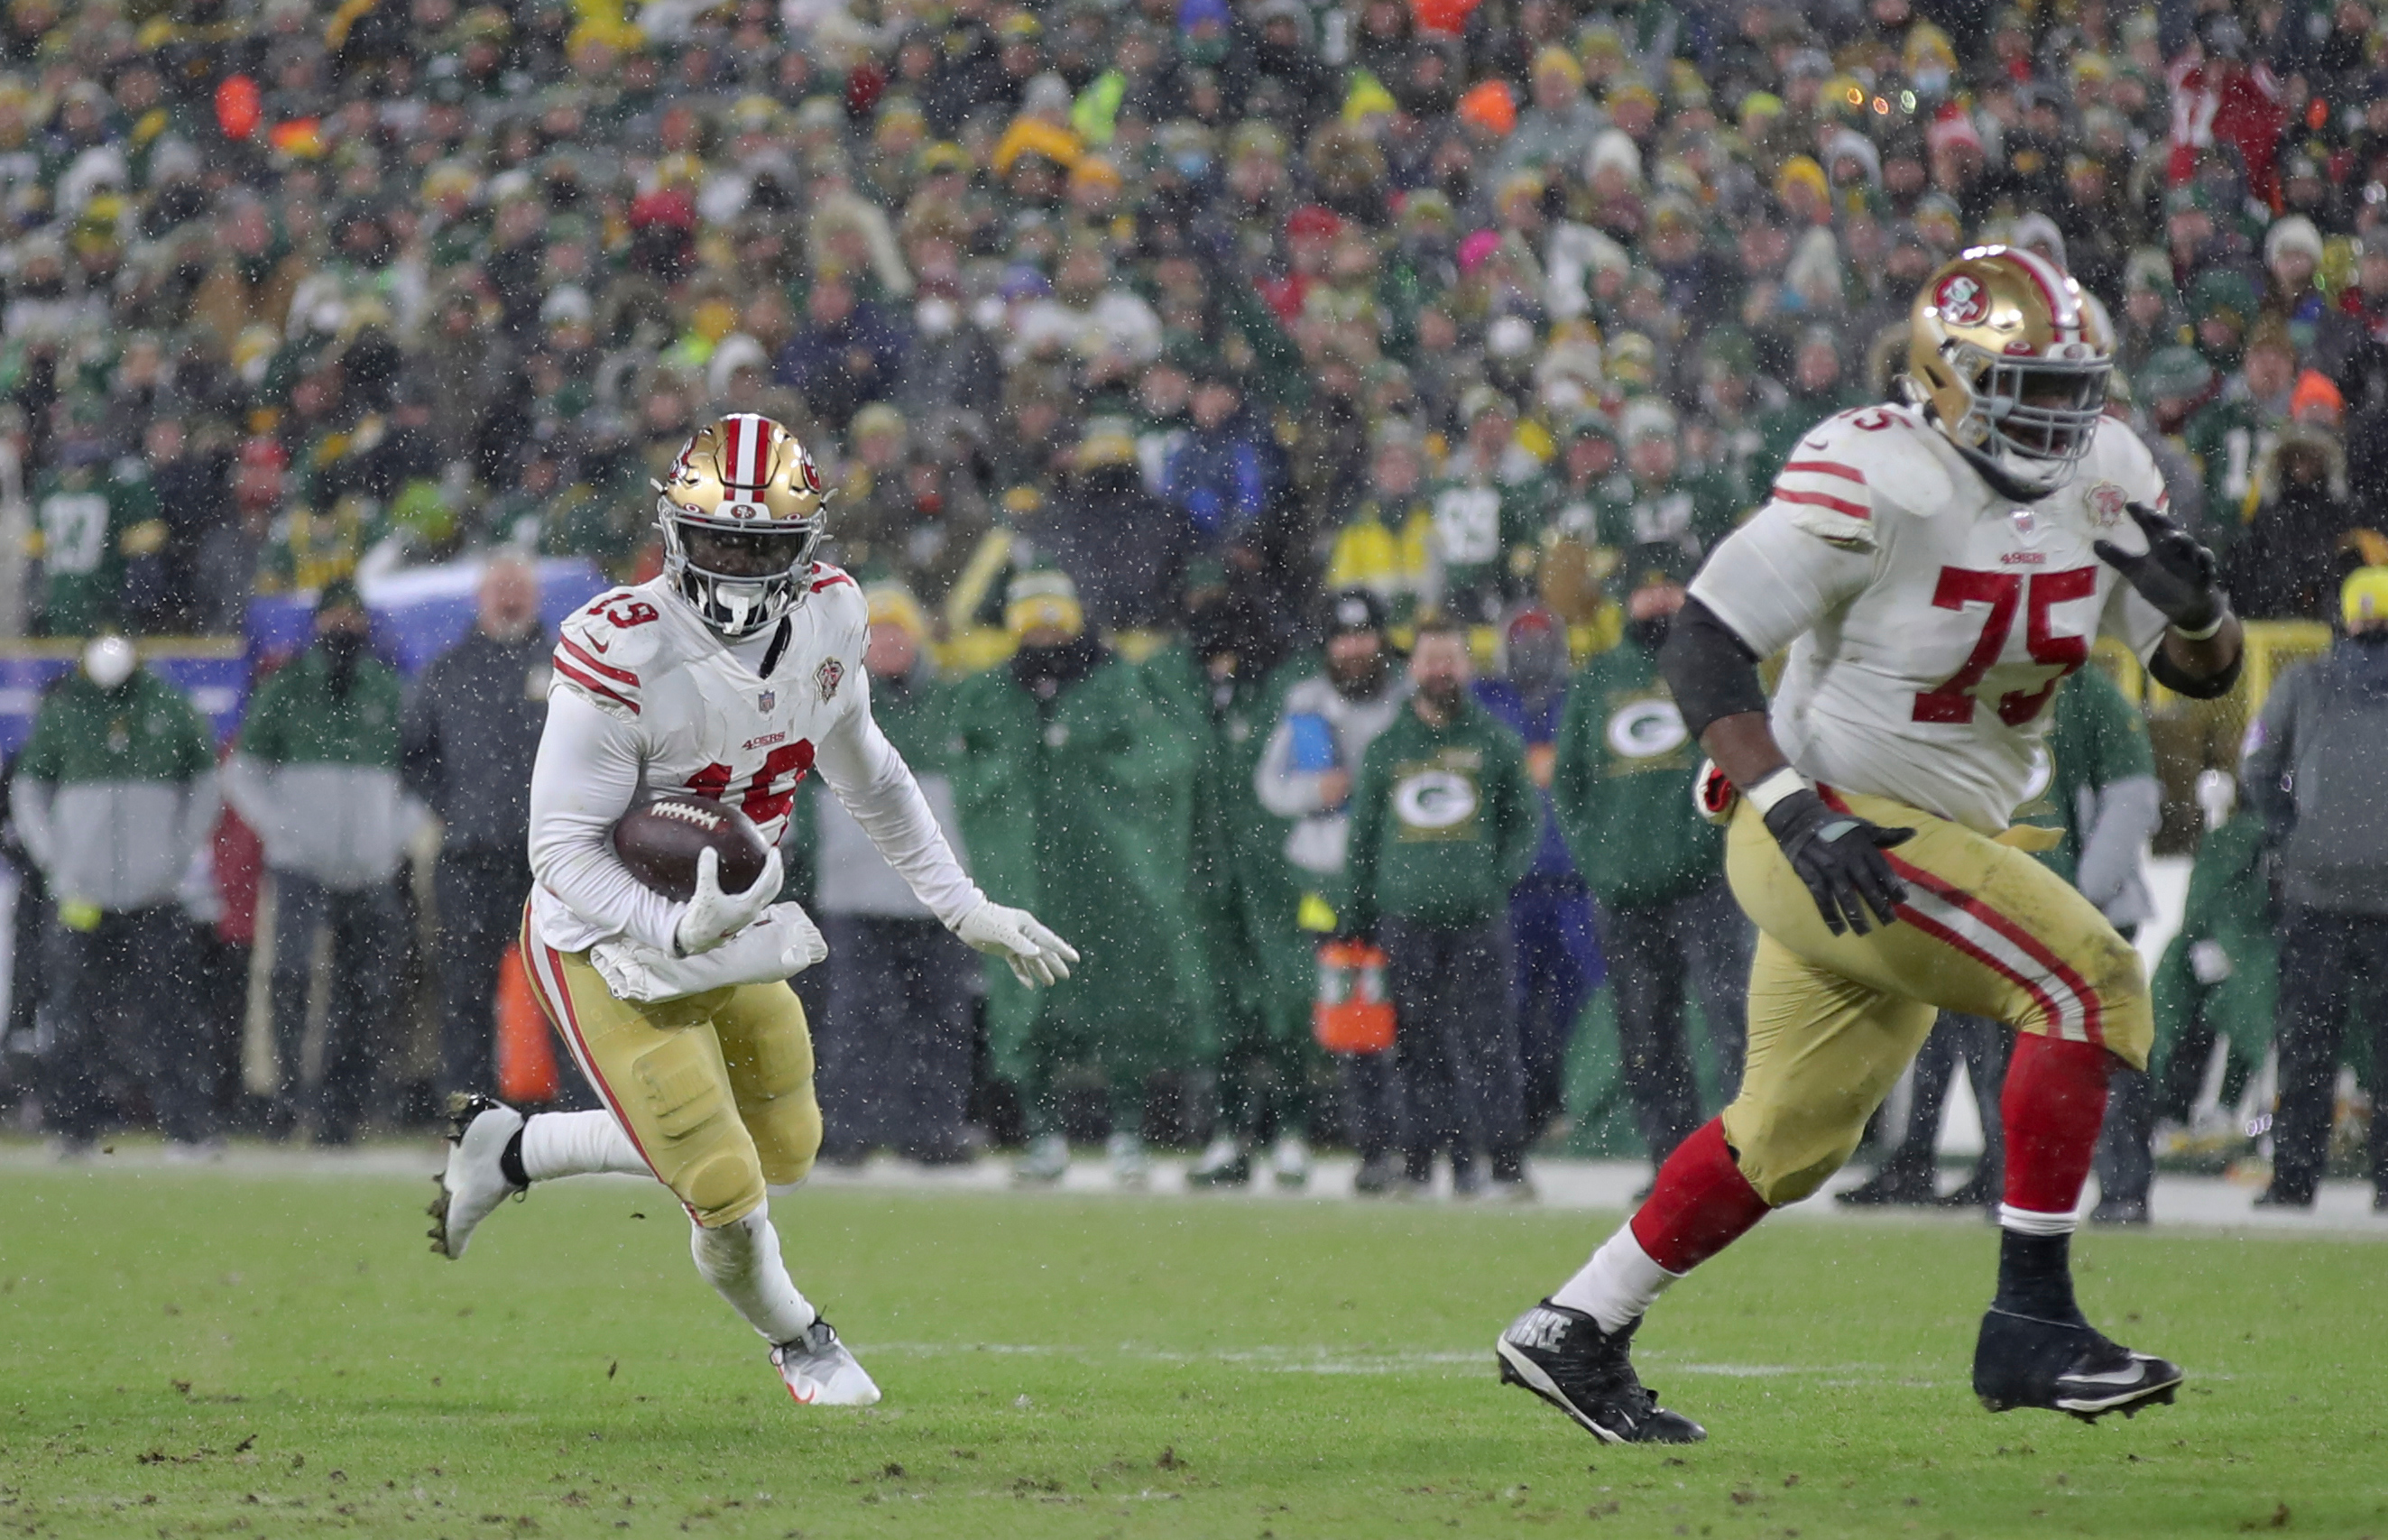 Deebo Samuel #19 of the San Francisco 49ers runs after making a catch during the game against the Green Bay Packers in the NFC Divisional Playoff game at Lambeau Field on January 22, 2022 in Green Bay, Wisconsin. The 49ers defeated the Packers 13-10.